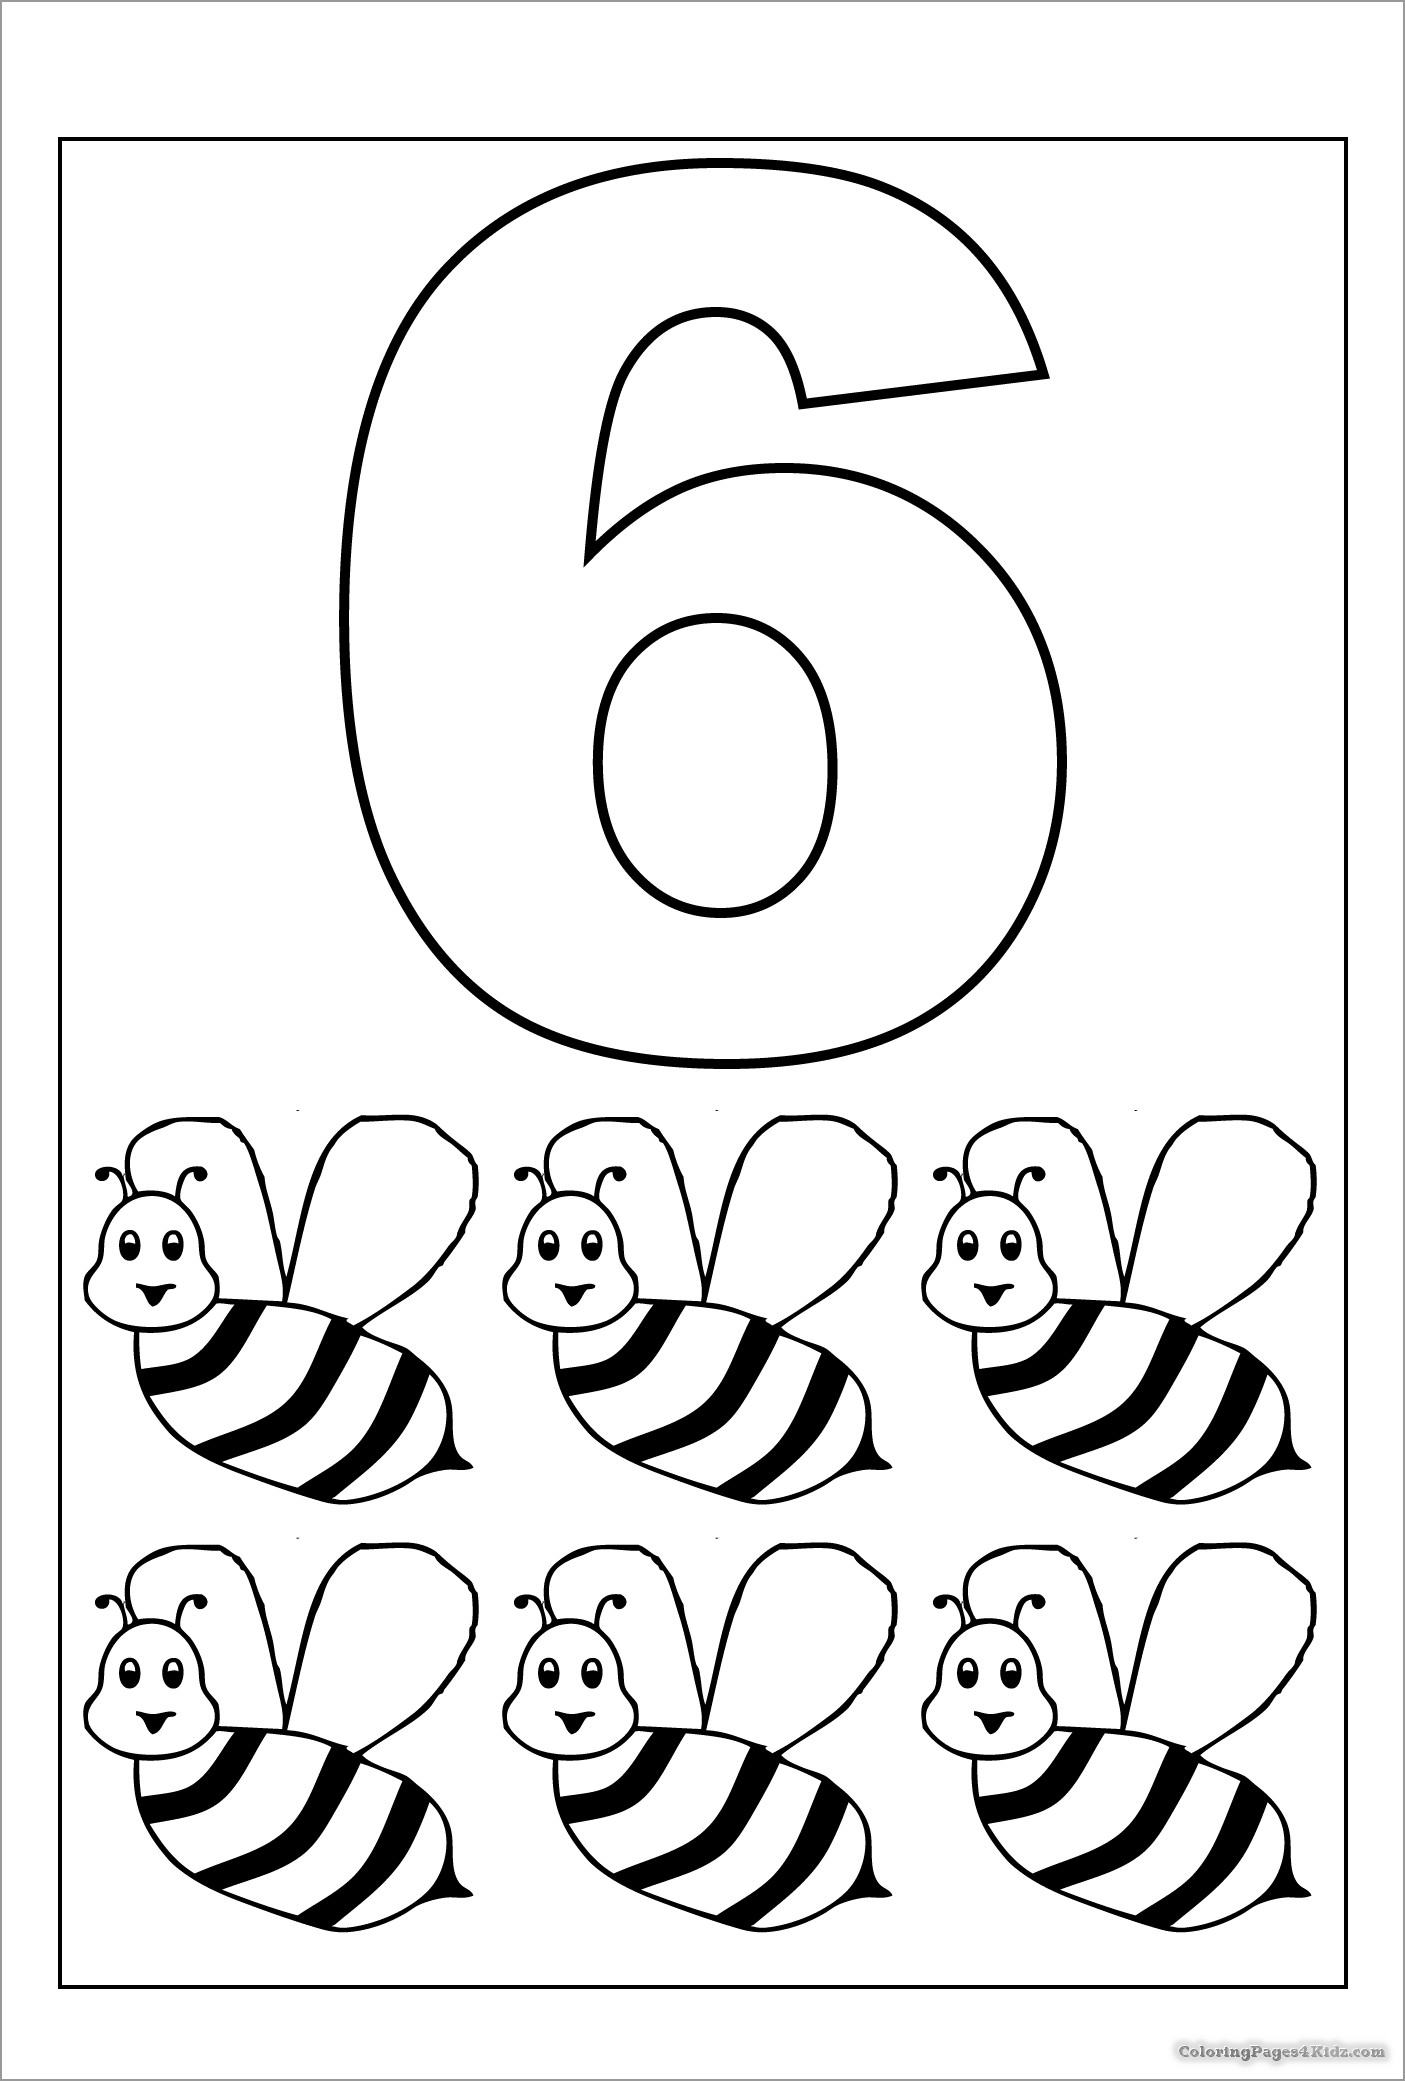 Number 6 Bees Coloring Pages